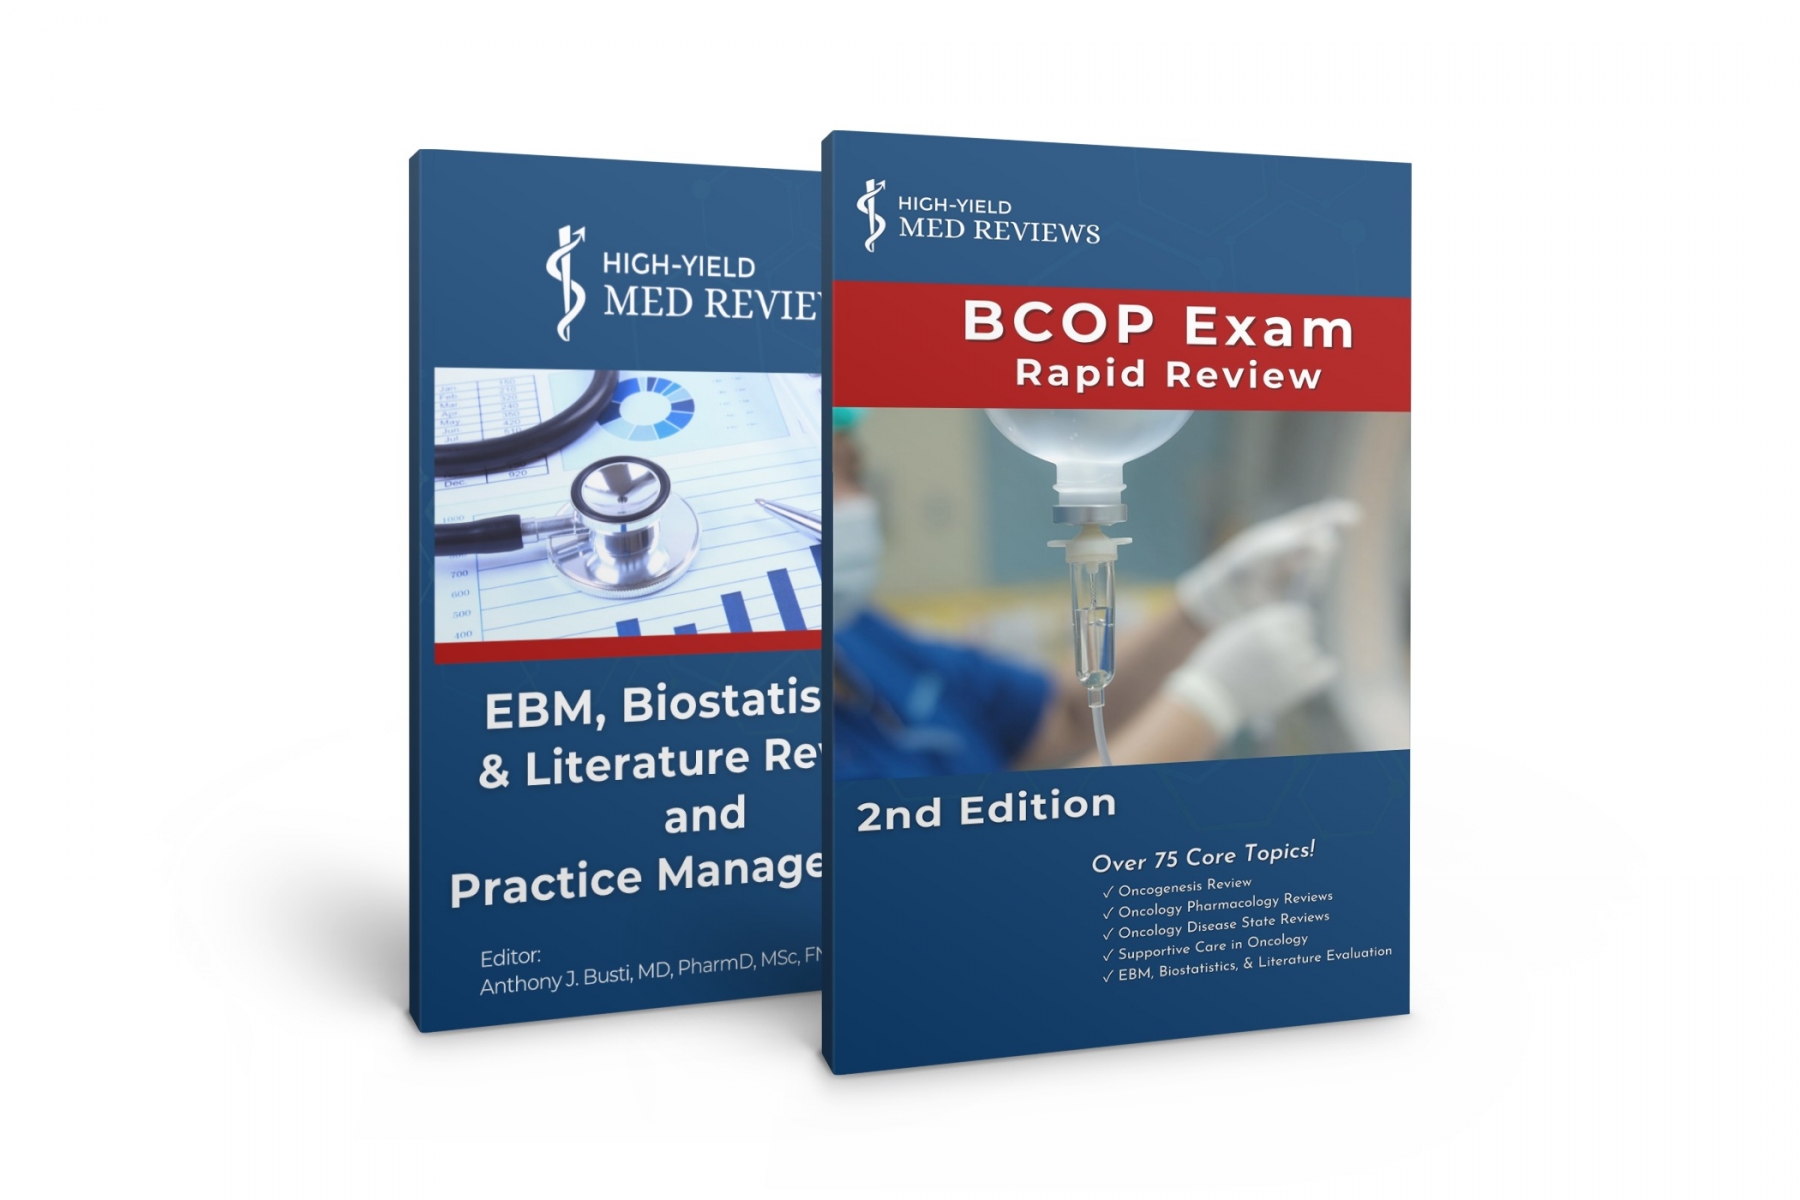 BCOP rapid review book and EBM and biostatistics book